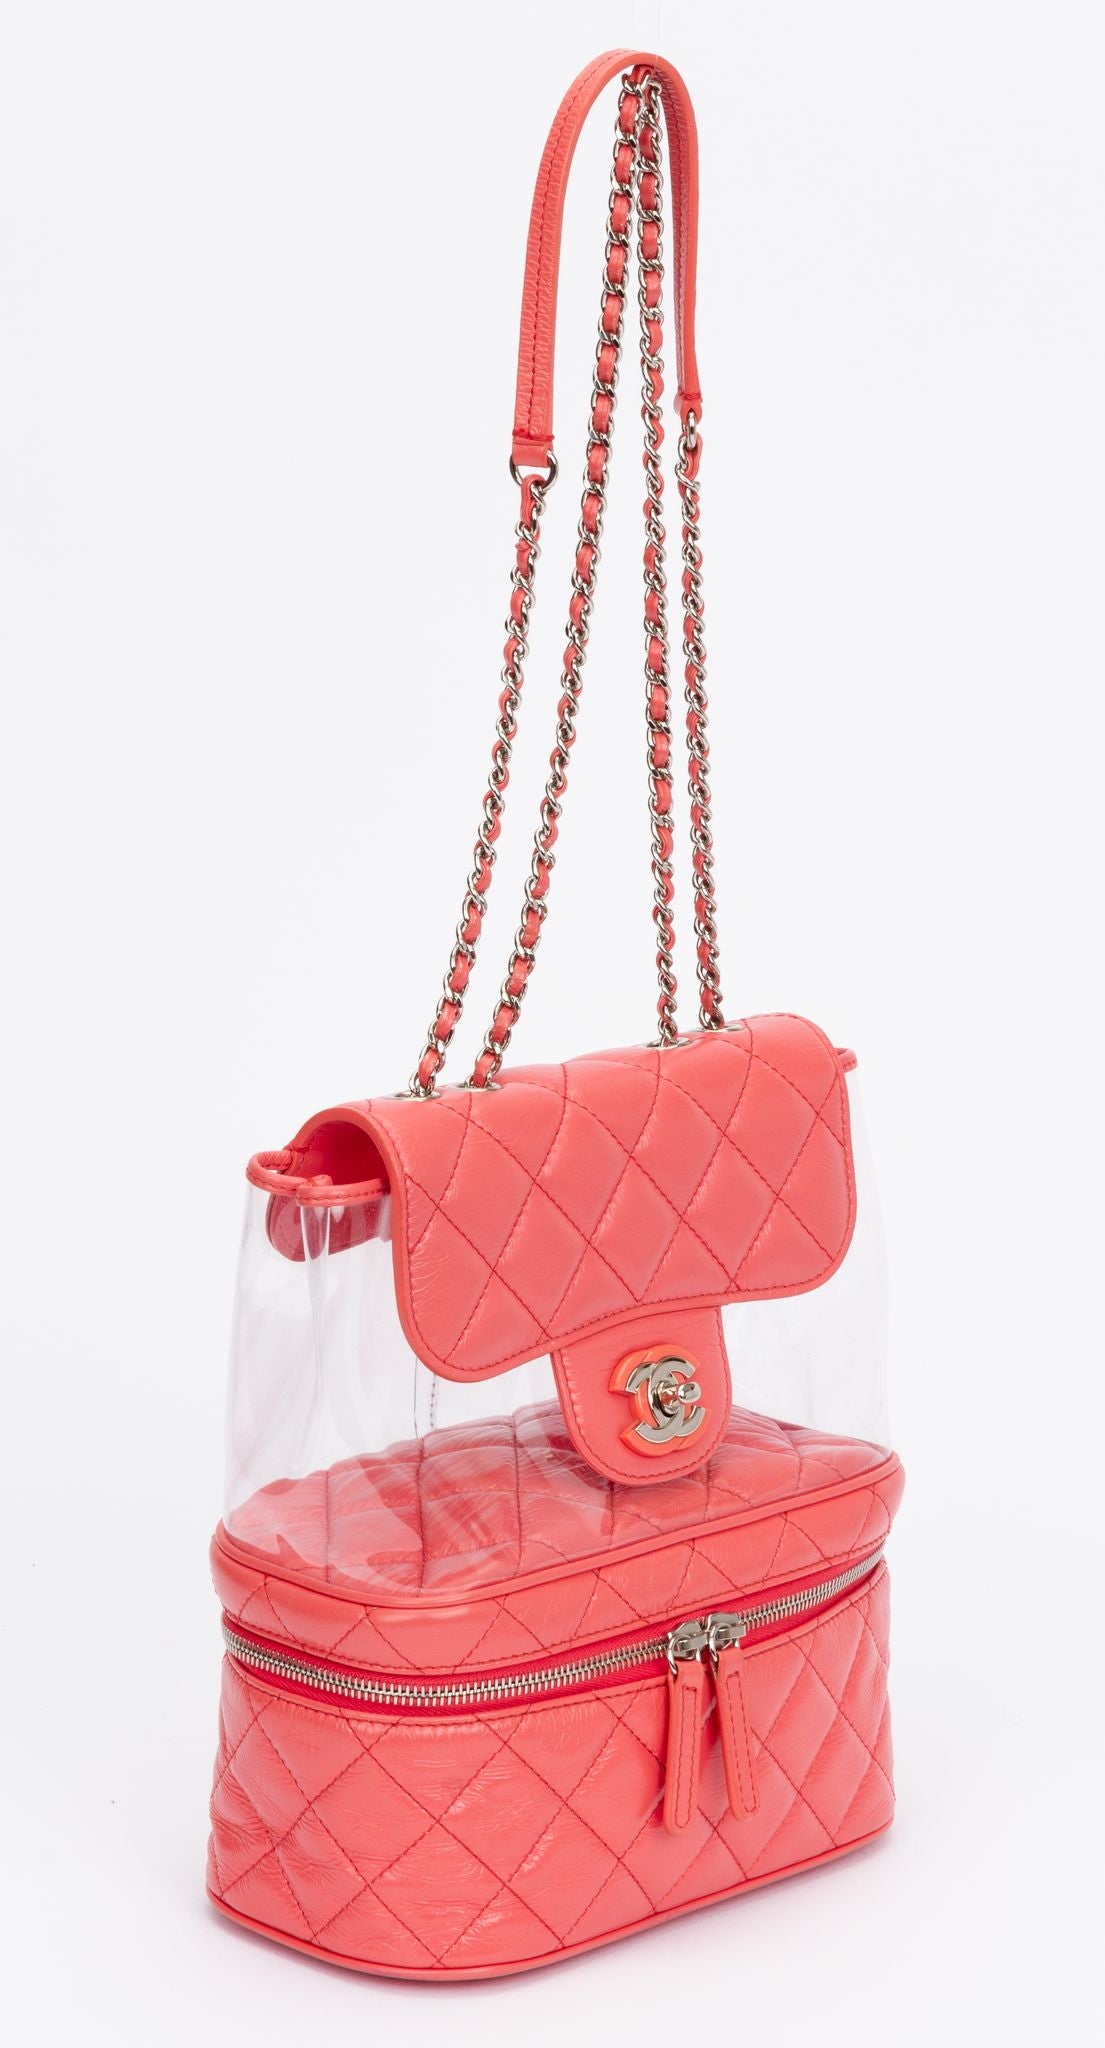 CHANEL Pink PVC Exterior Bags & Handbags for Women, Authenticity  Guaranteed